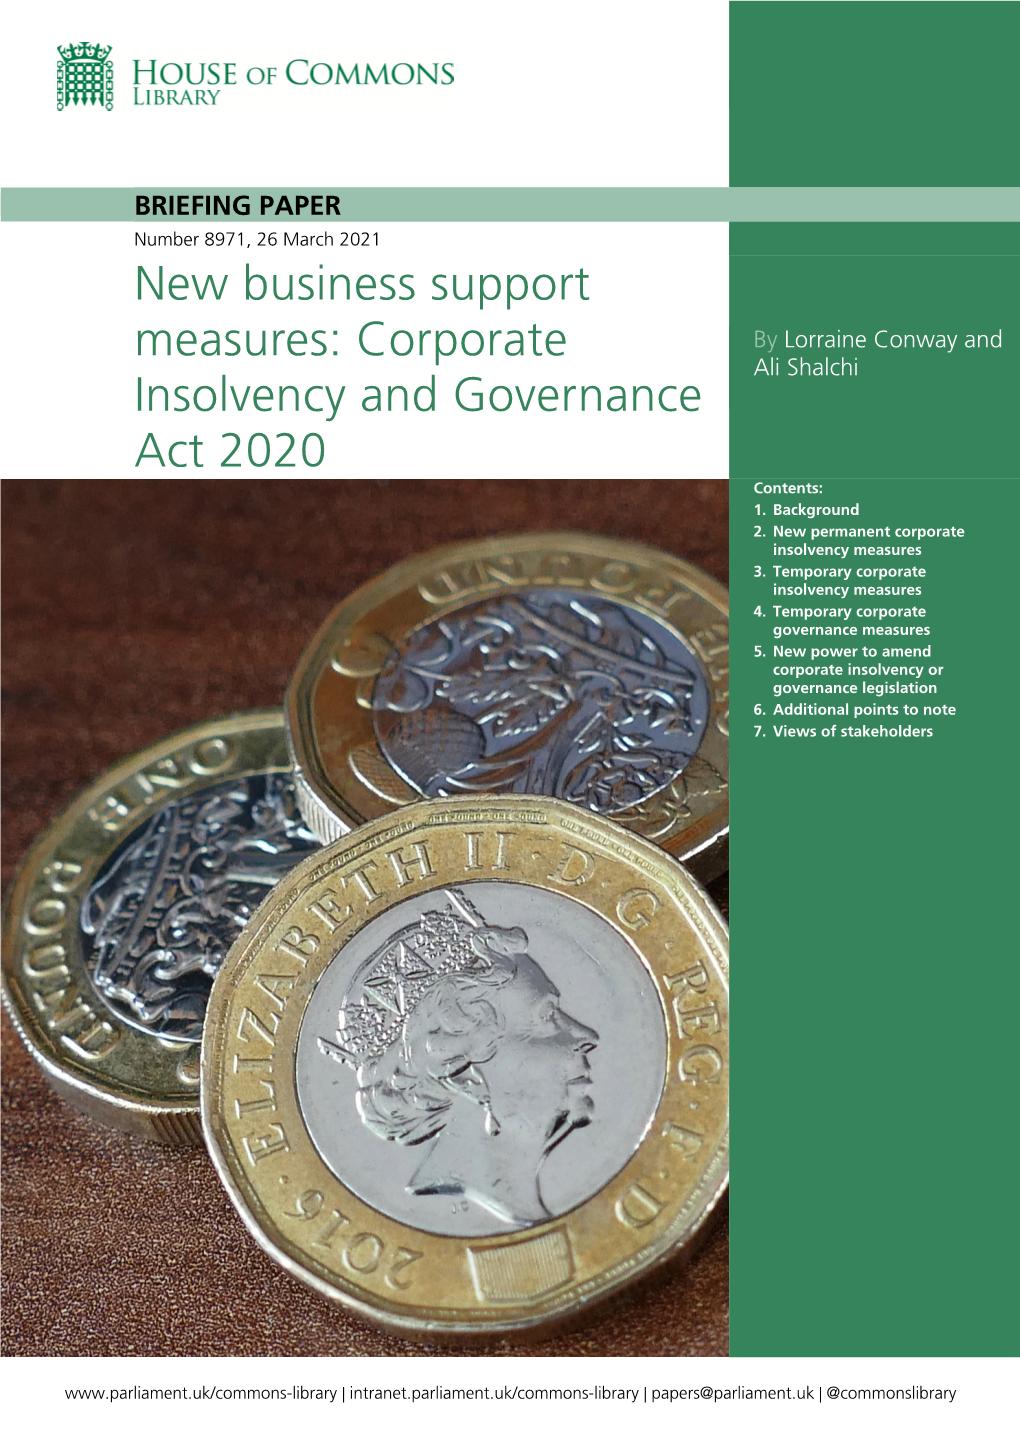 Corporate Insolvency and Governance Act 2020